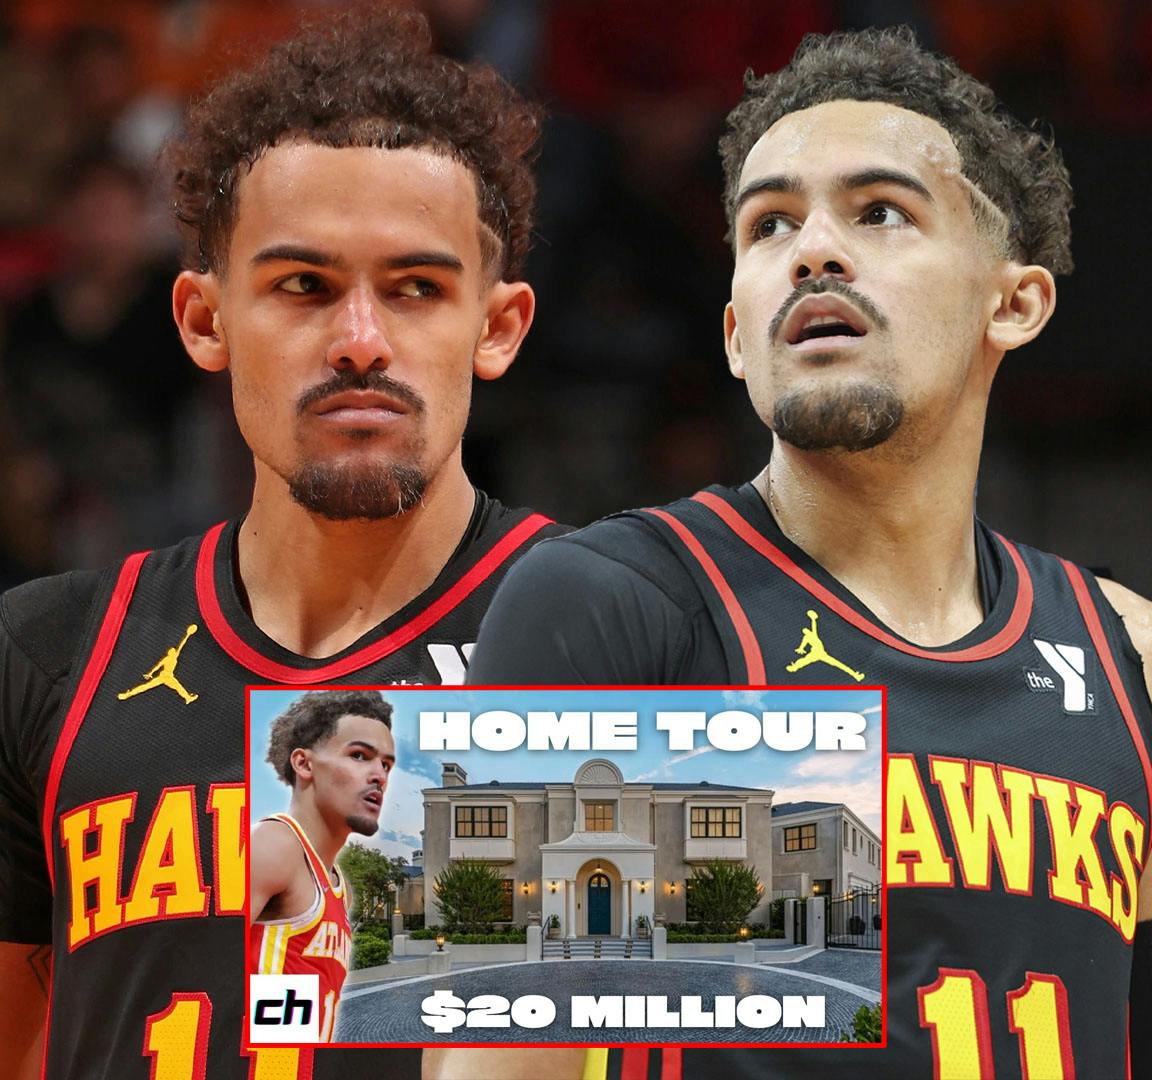 Cover Image for INSIDE NBA Star Trae Young’s $20 MILLION Mansion